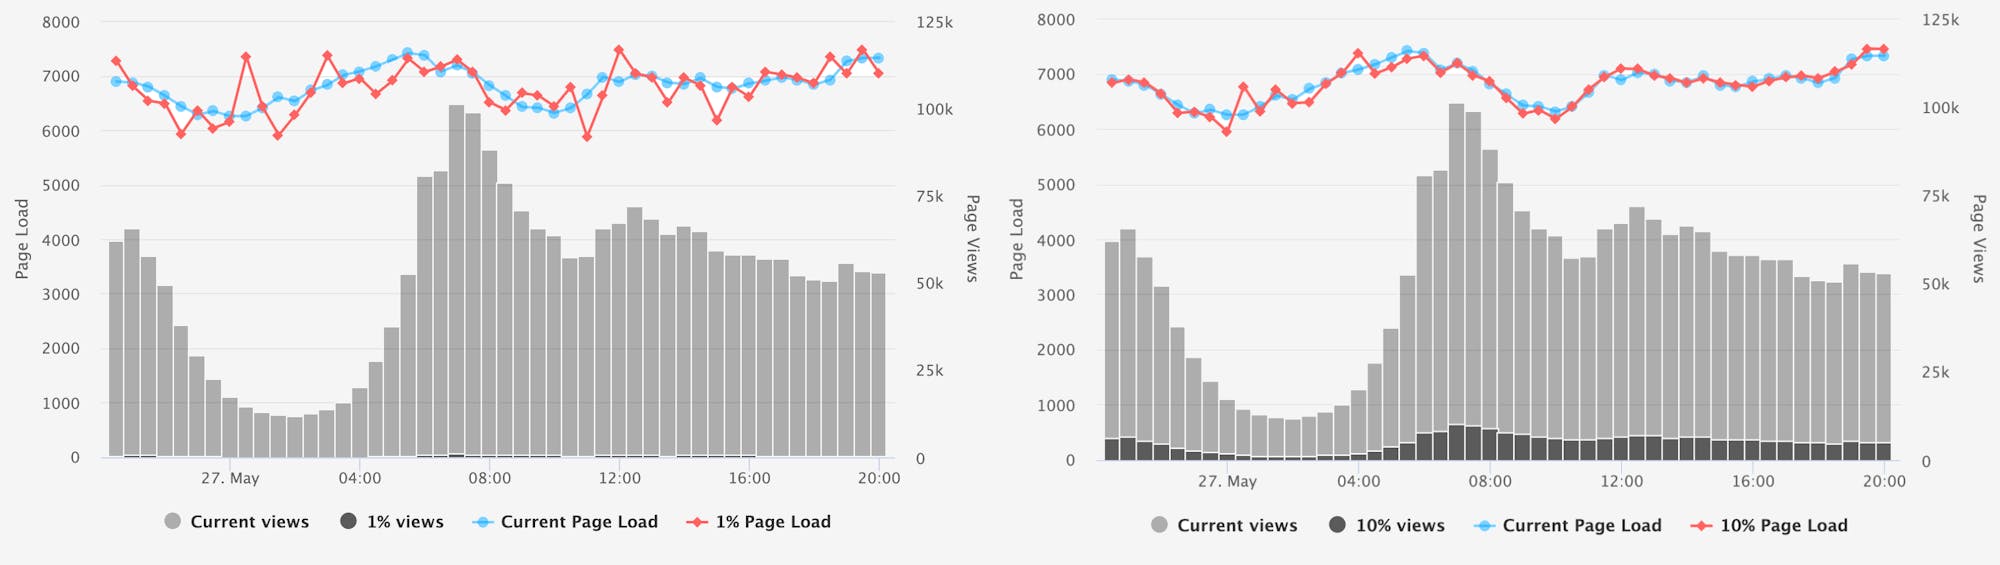 Side by side comparison of time series hourly data for a large site.